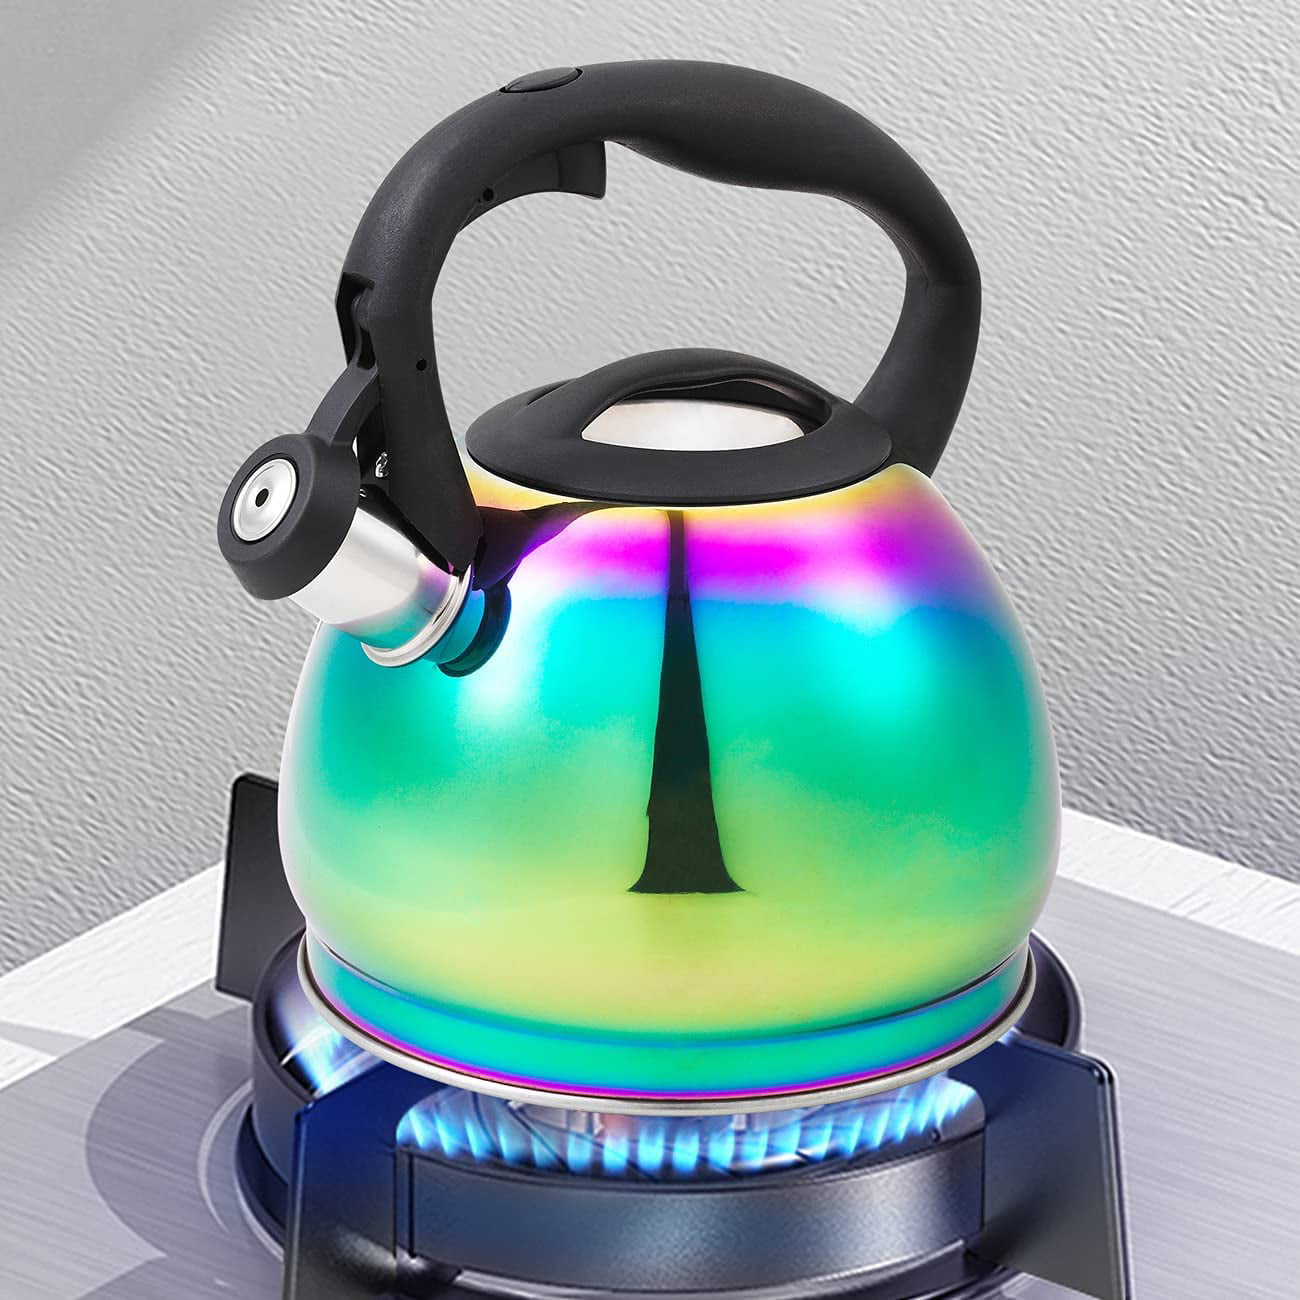  SHANGZHER Cute Tea Kettle Stovetop Whistling Colorful